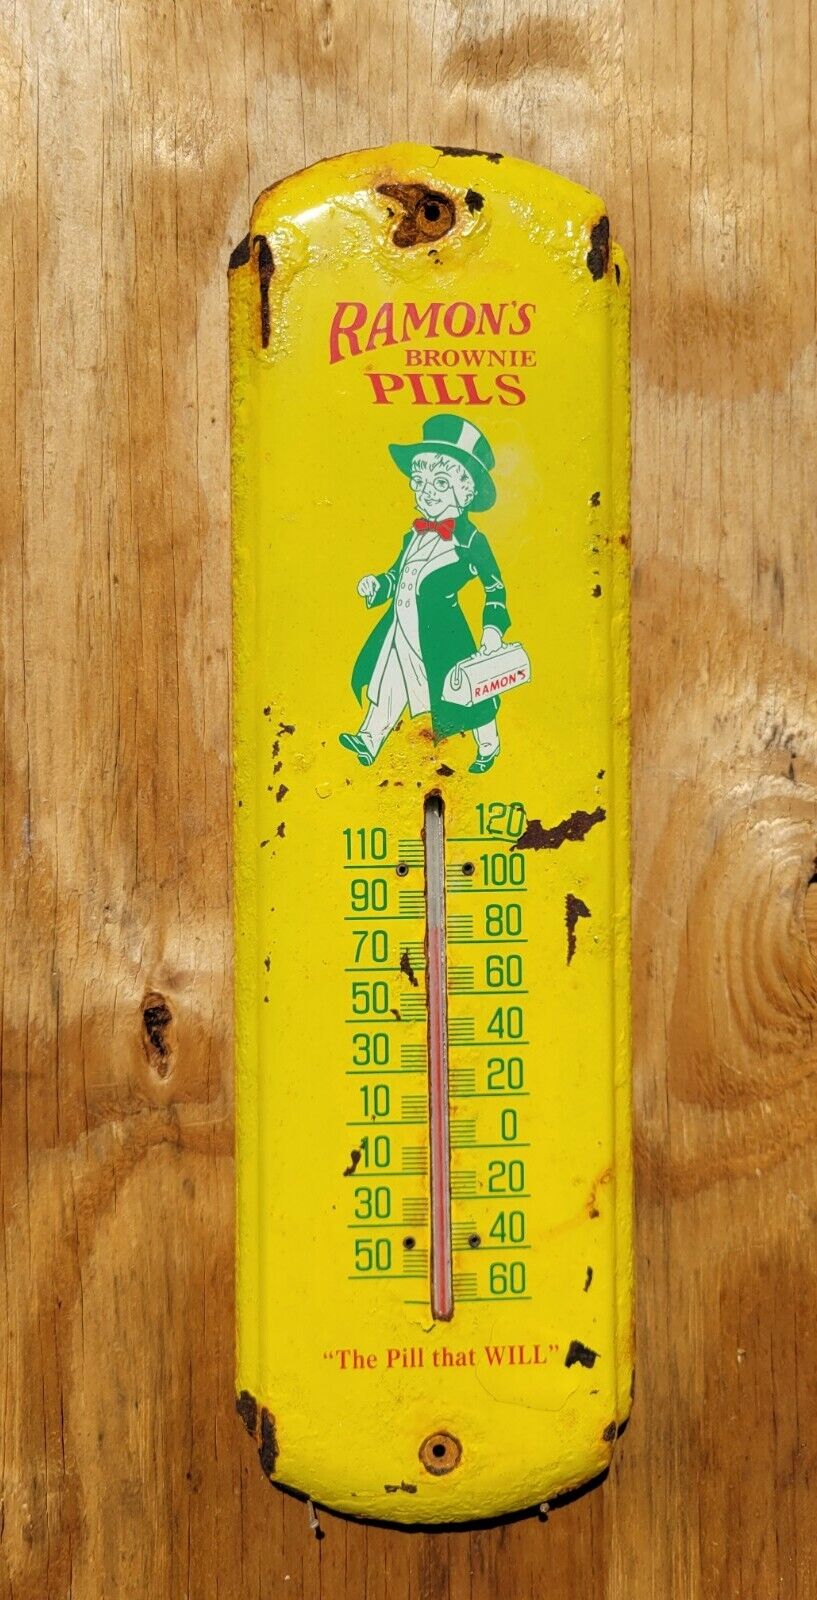 VINTAGE RAMONS THERMOMETER SIGN BROWNIE PILLS MEDICINE DOCTOR PHARMACY ELIXER